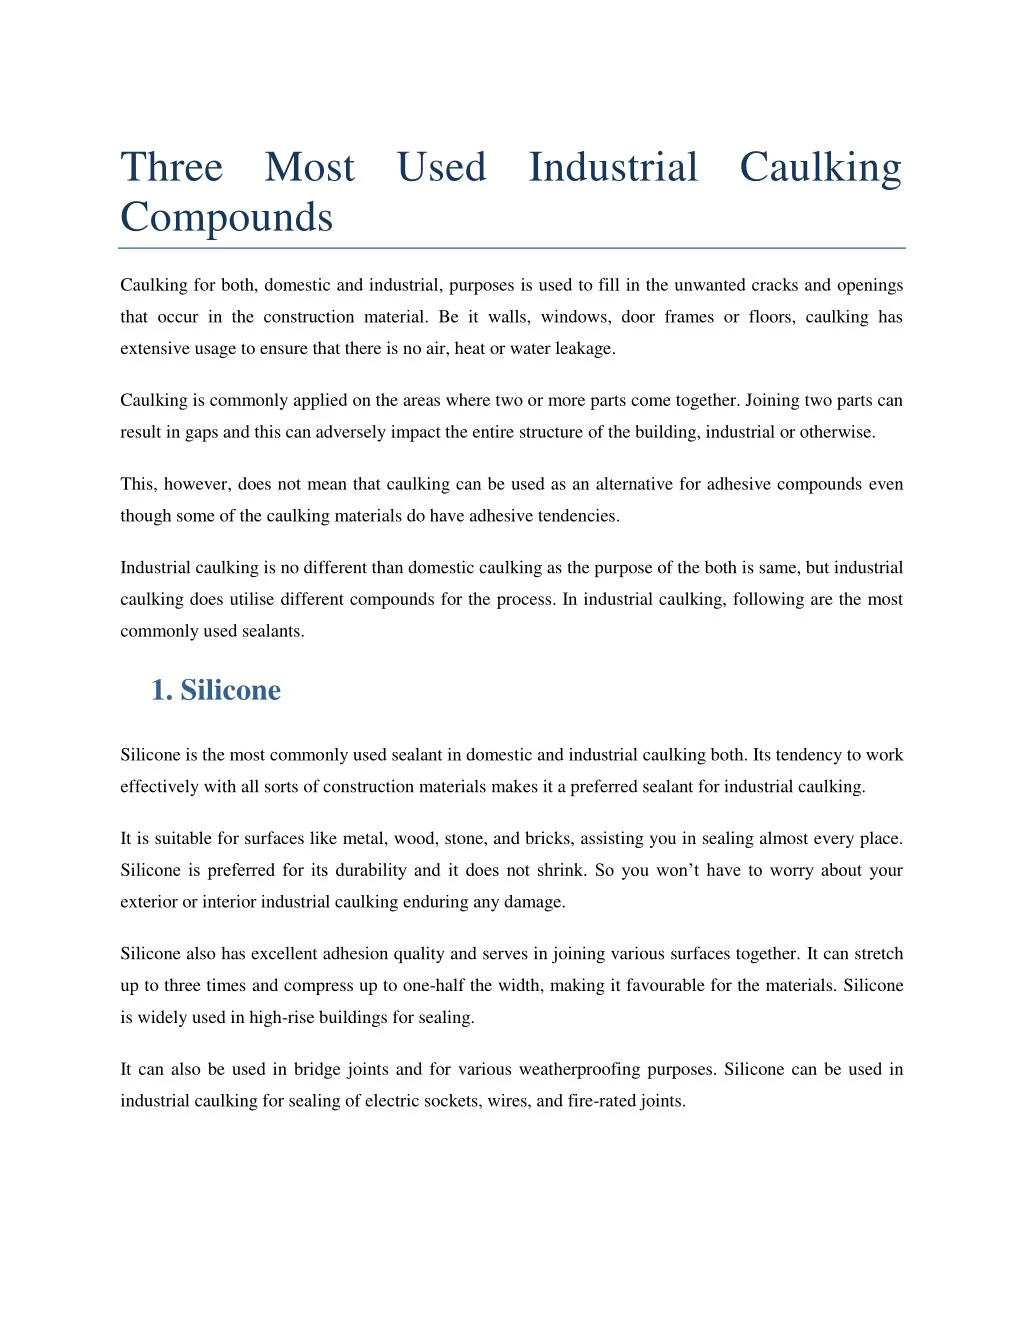 three most used industrial caulking compounds